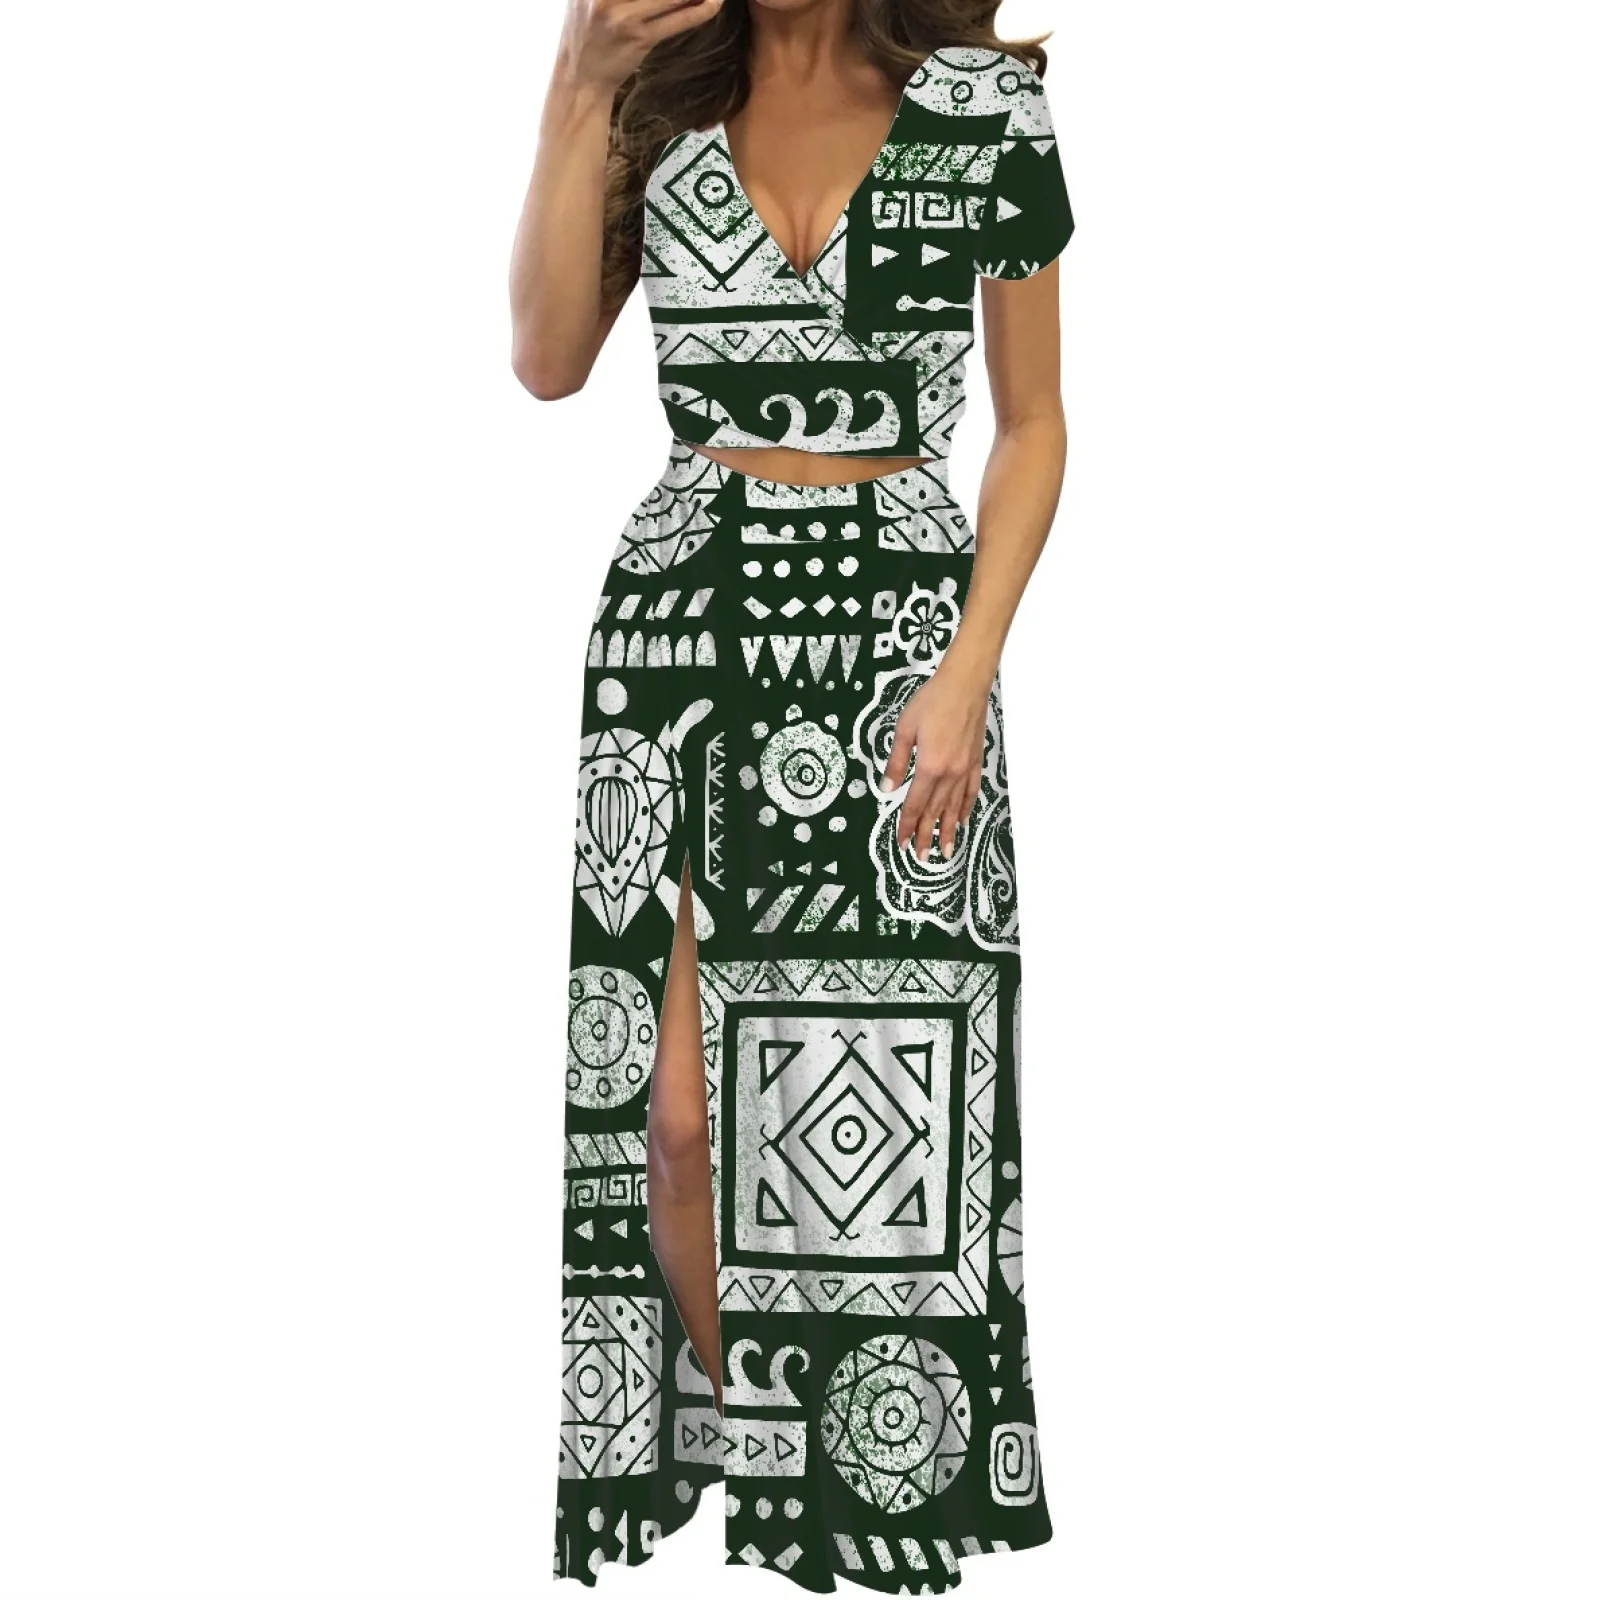 

Dress Short Sleeved Dress High Slit Casual Dress Sexy V-neck Summer Polynesian Tribal Print Ladies Must Have For Office Travel